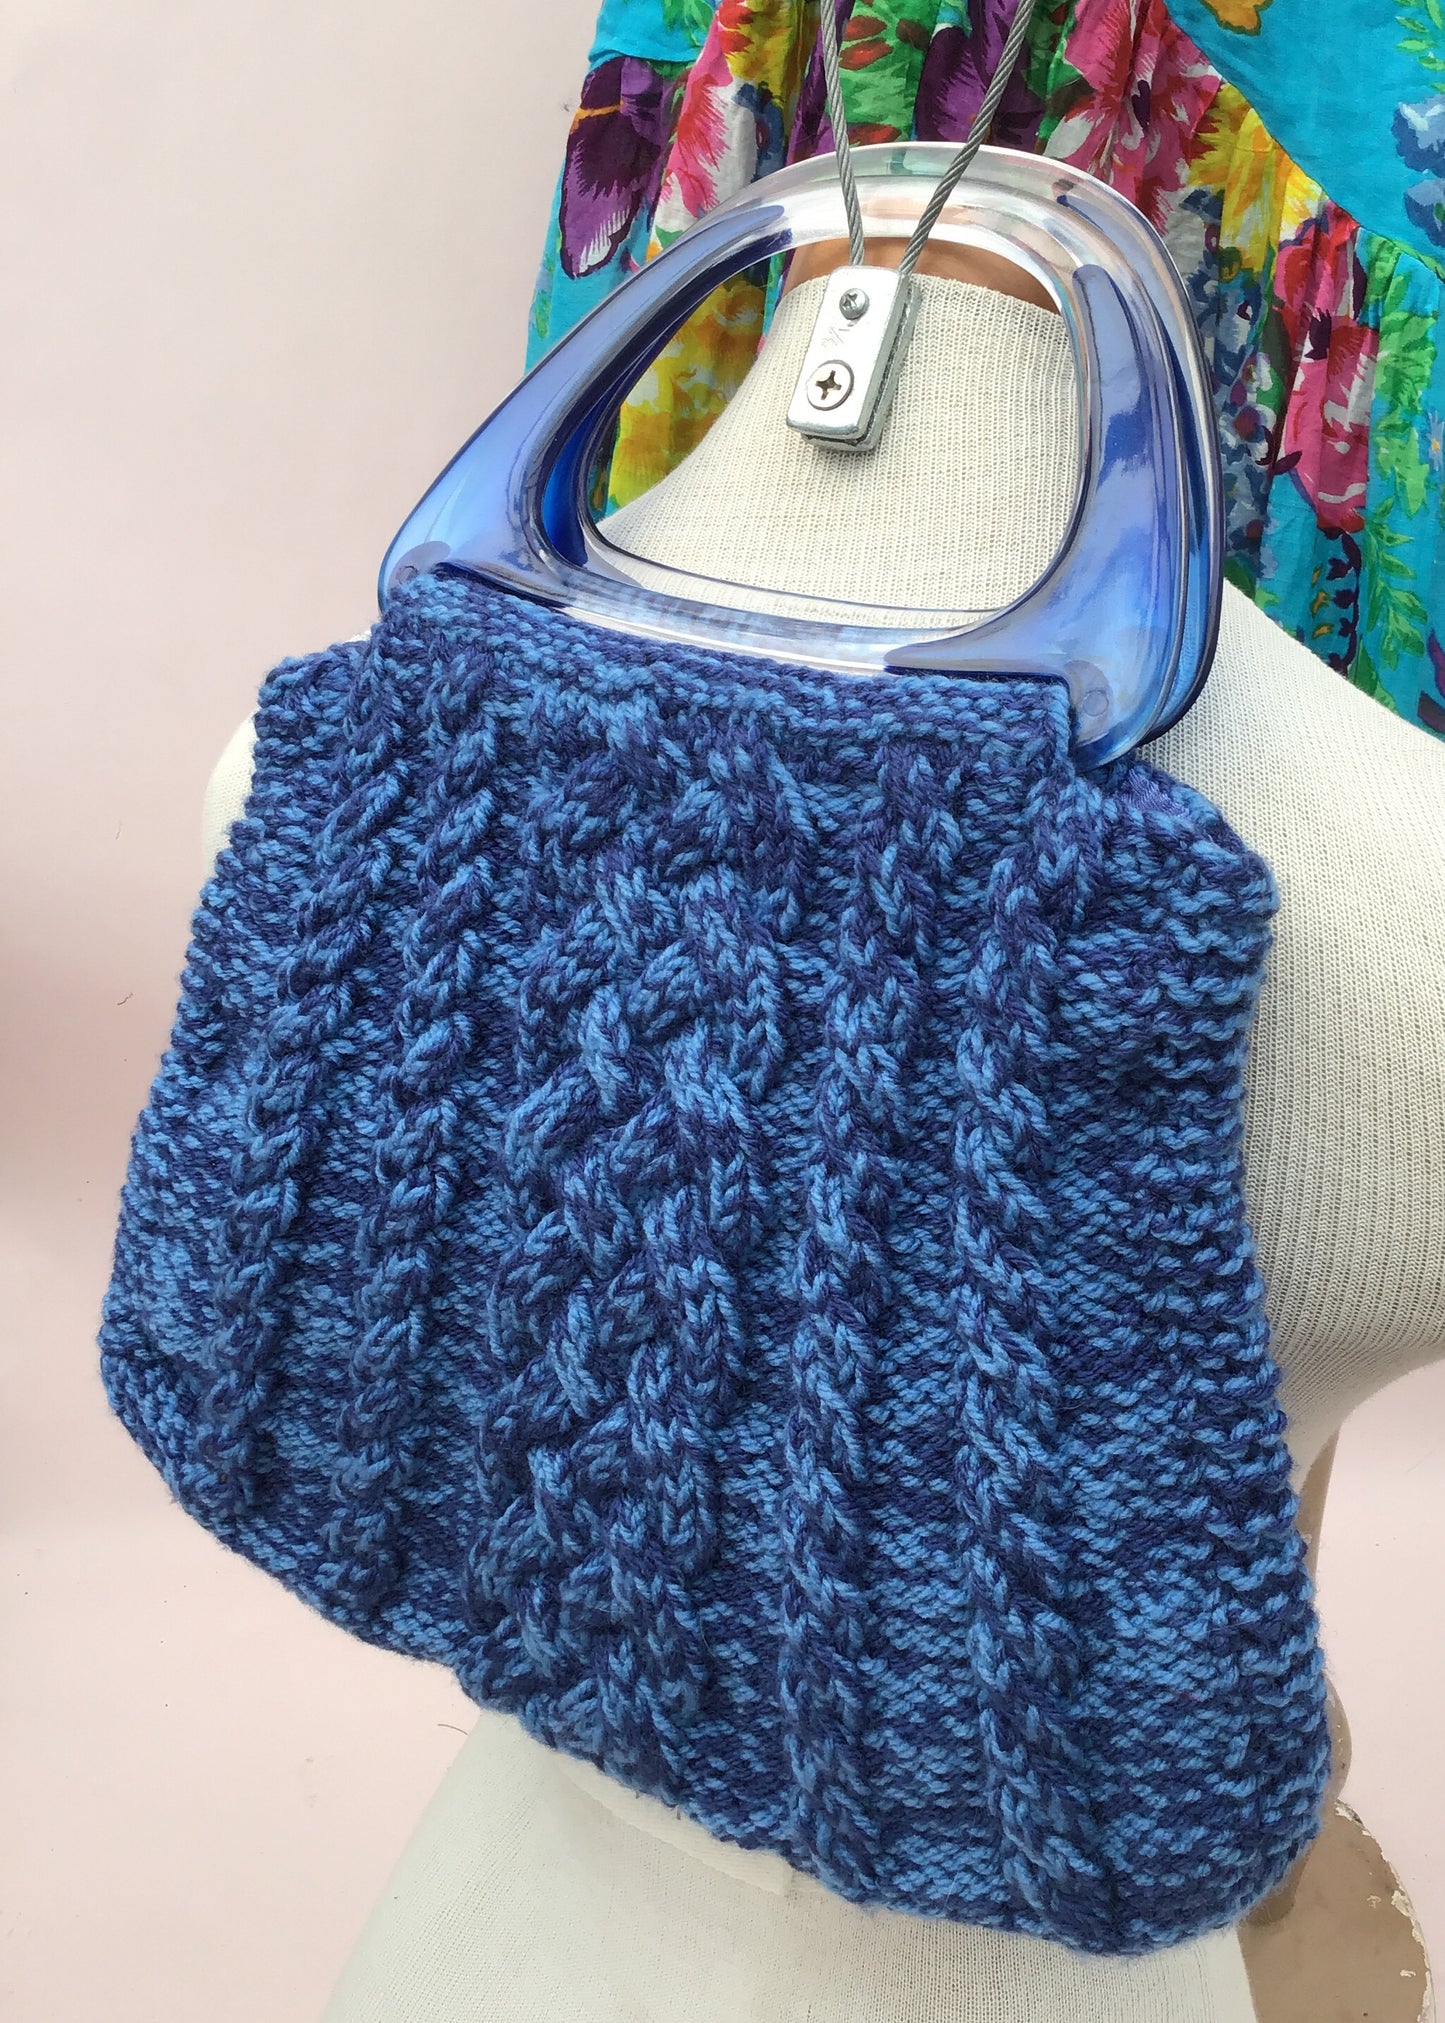 Vintage Blue Lucite Handle Knitting Bag 💙 Chunky Cable Knit